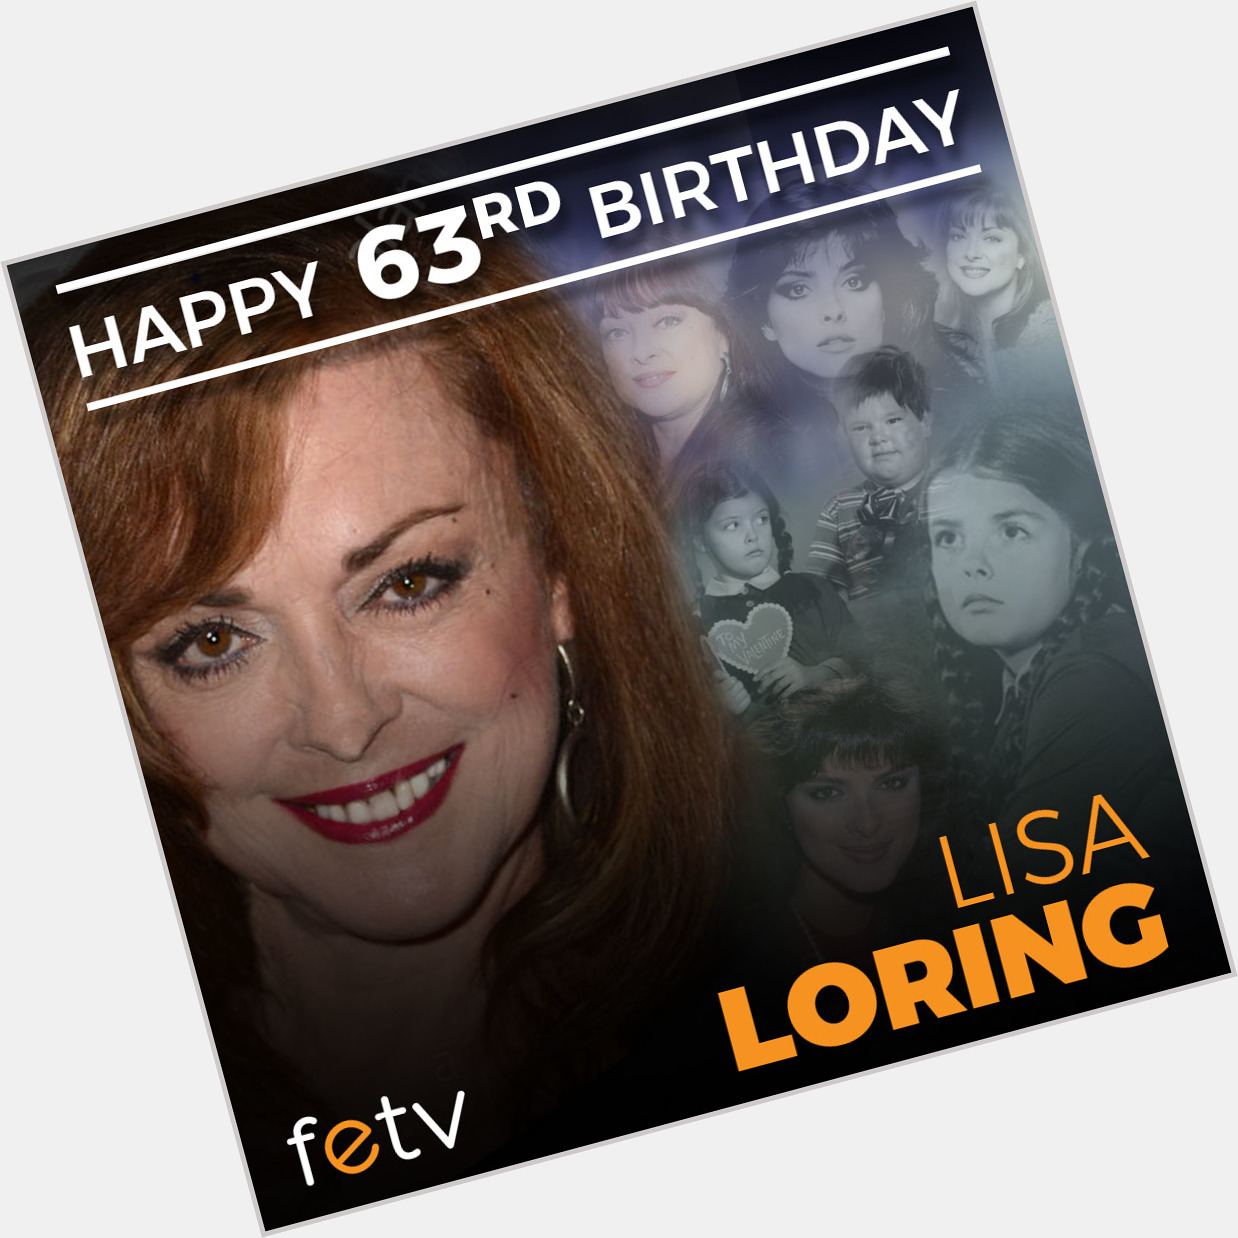 Happy Birthday to Lisa Loring! star turns 63 today.   